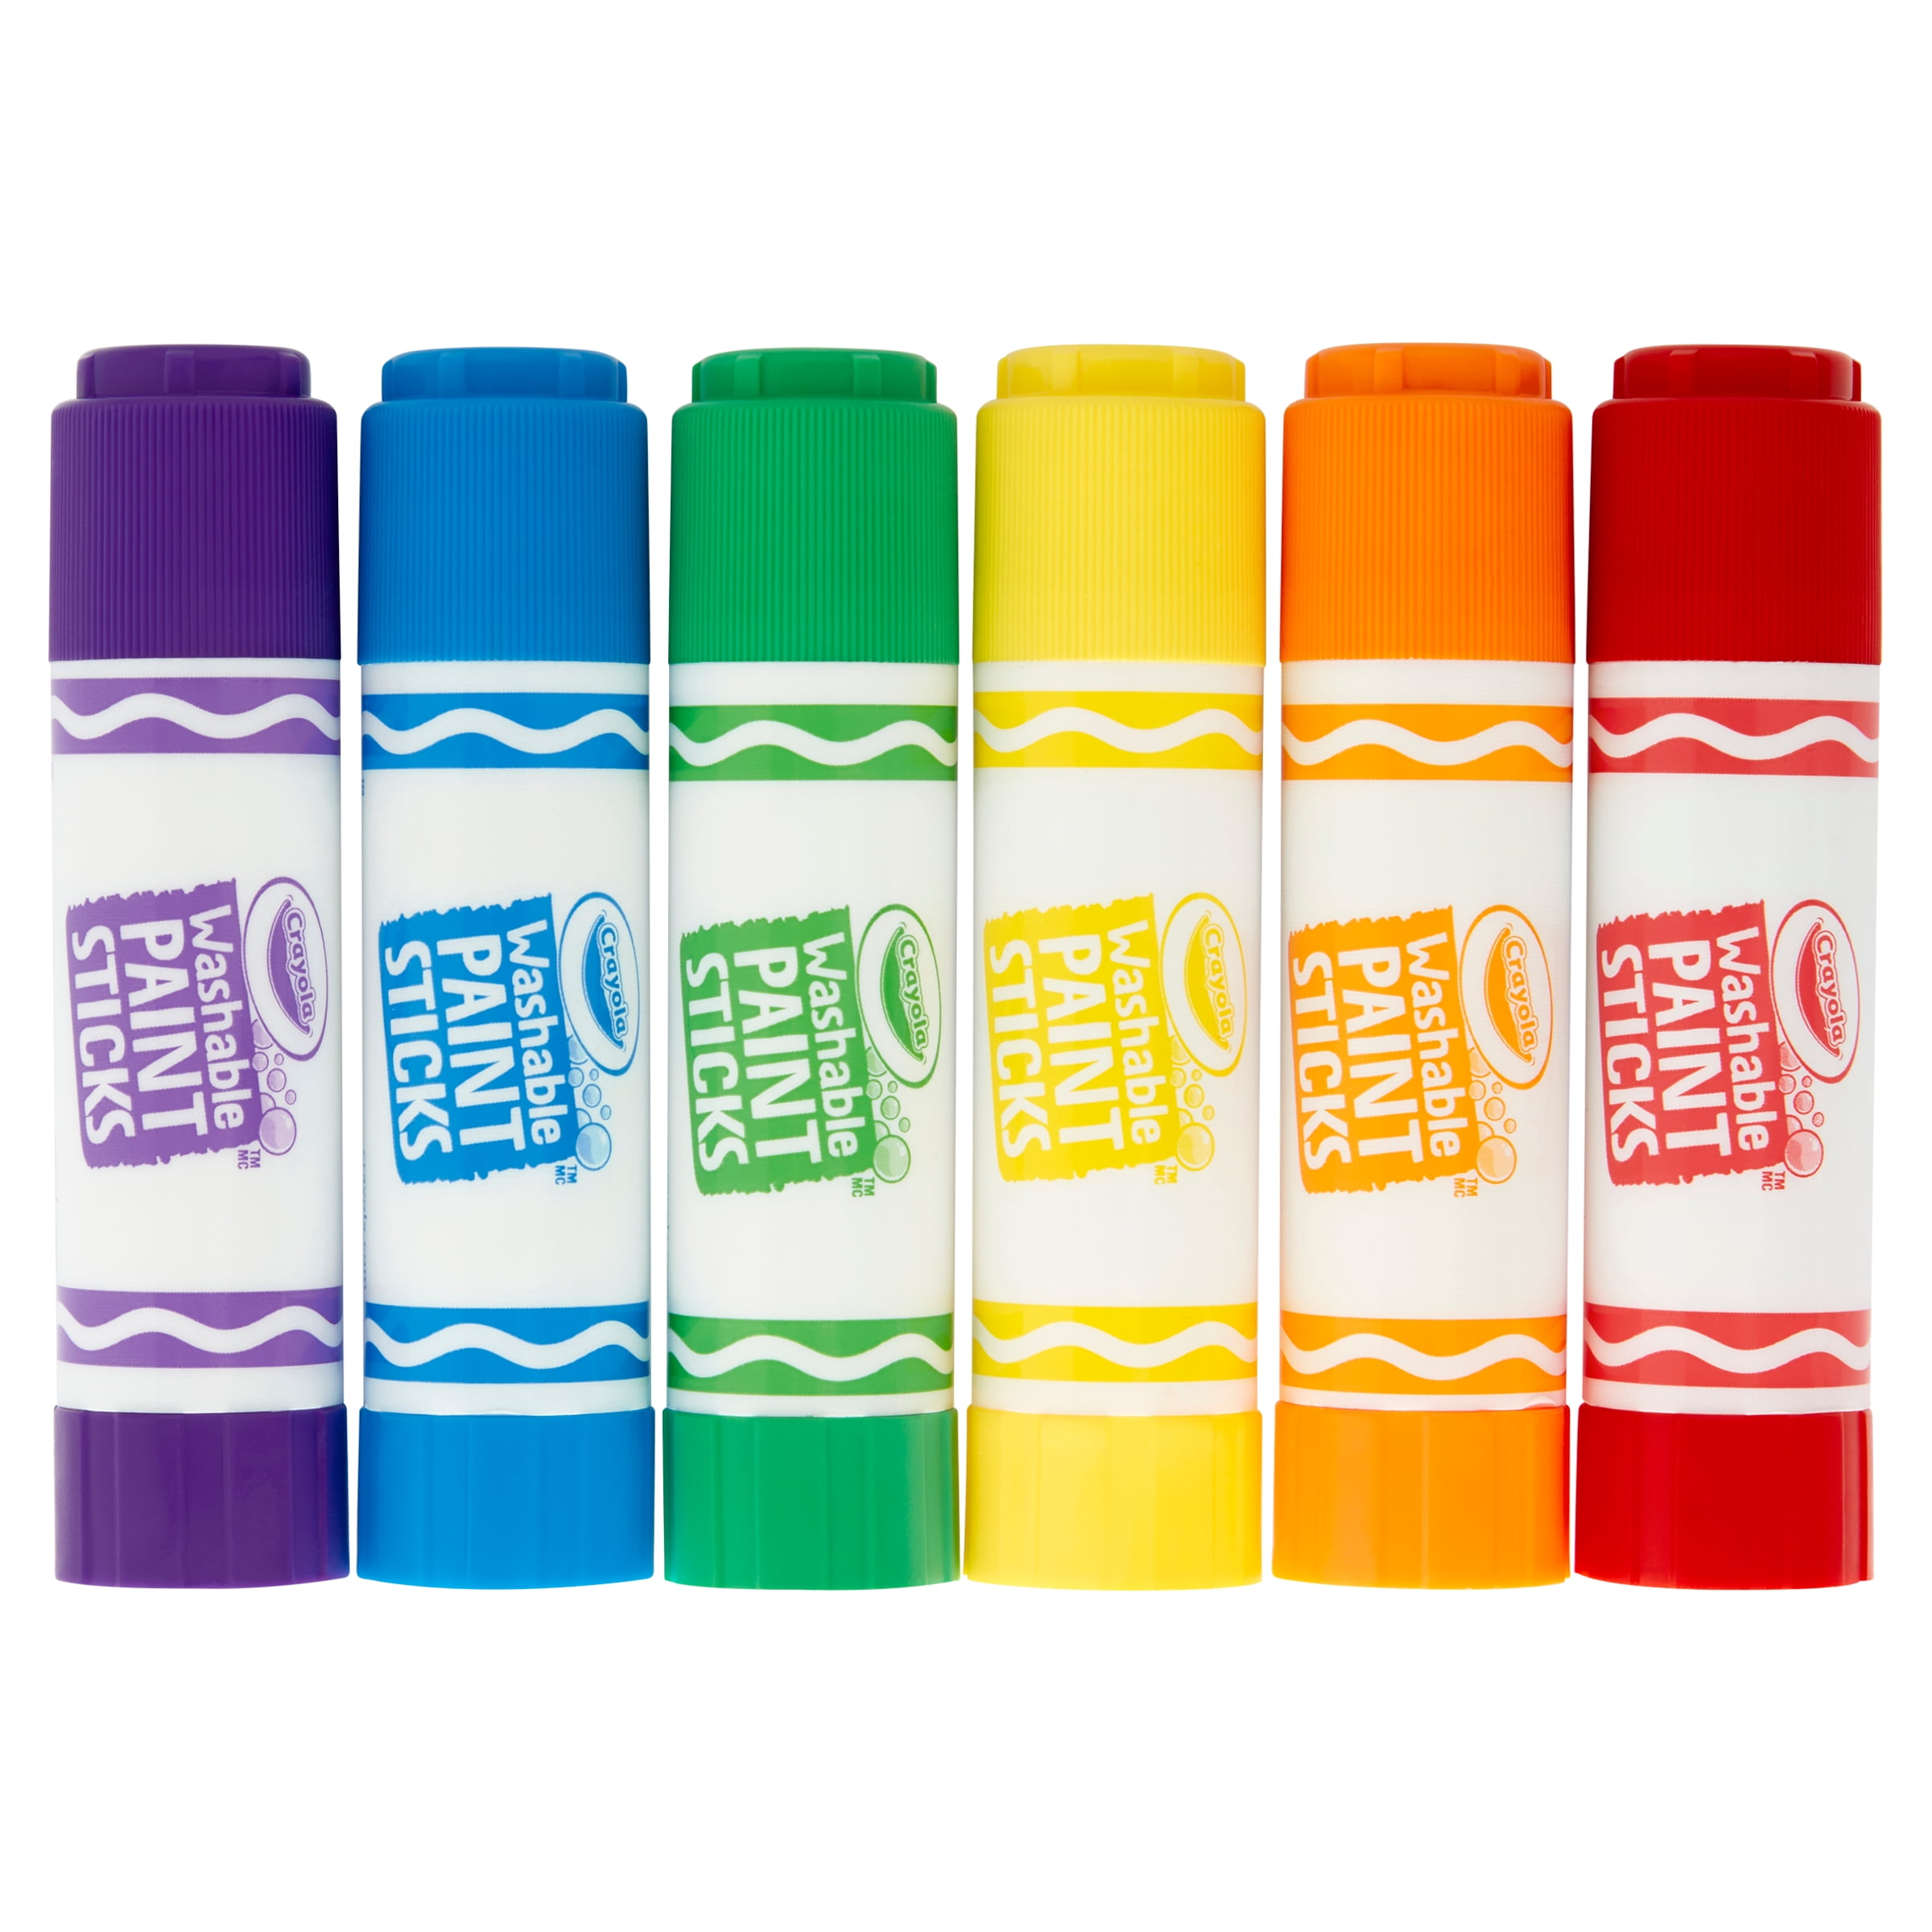 Crayola Project Quick Dry Paint Sticks, Assorted Colors, Child, 6 Count